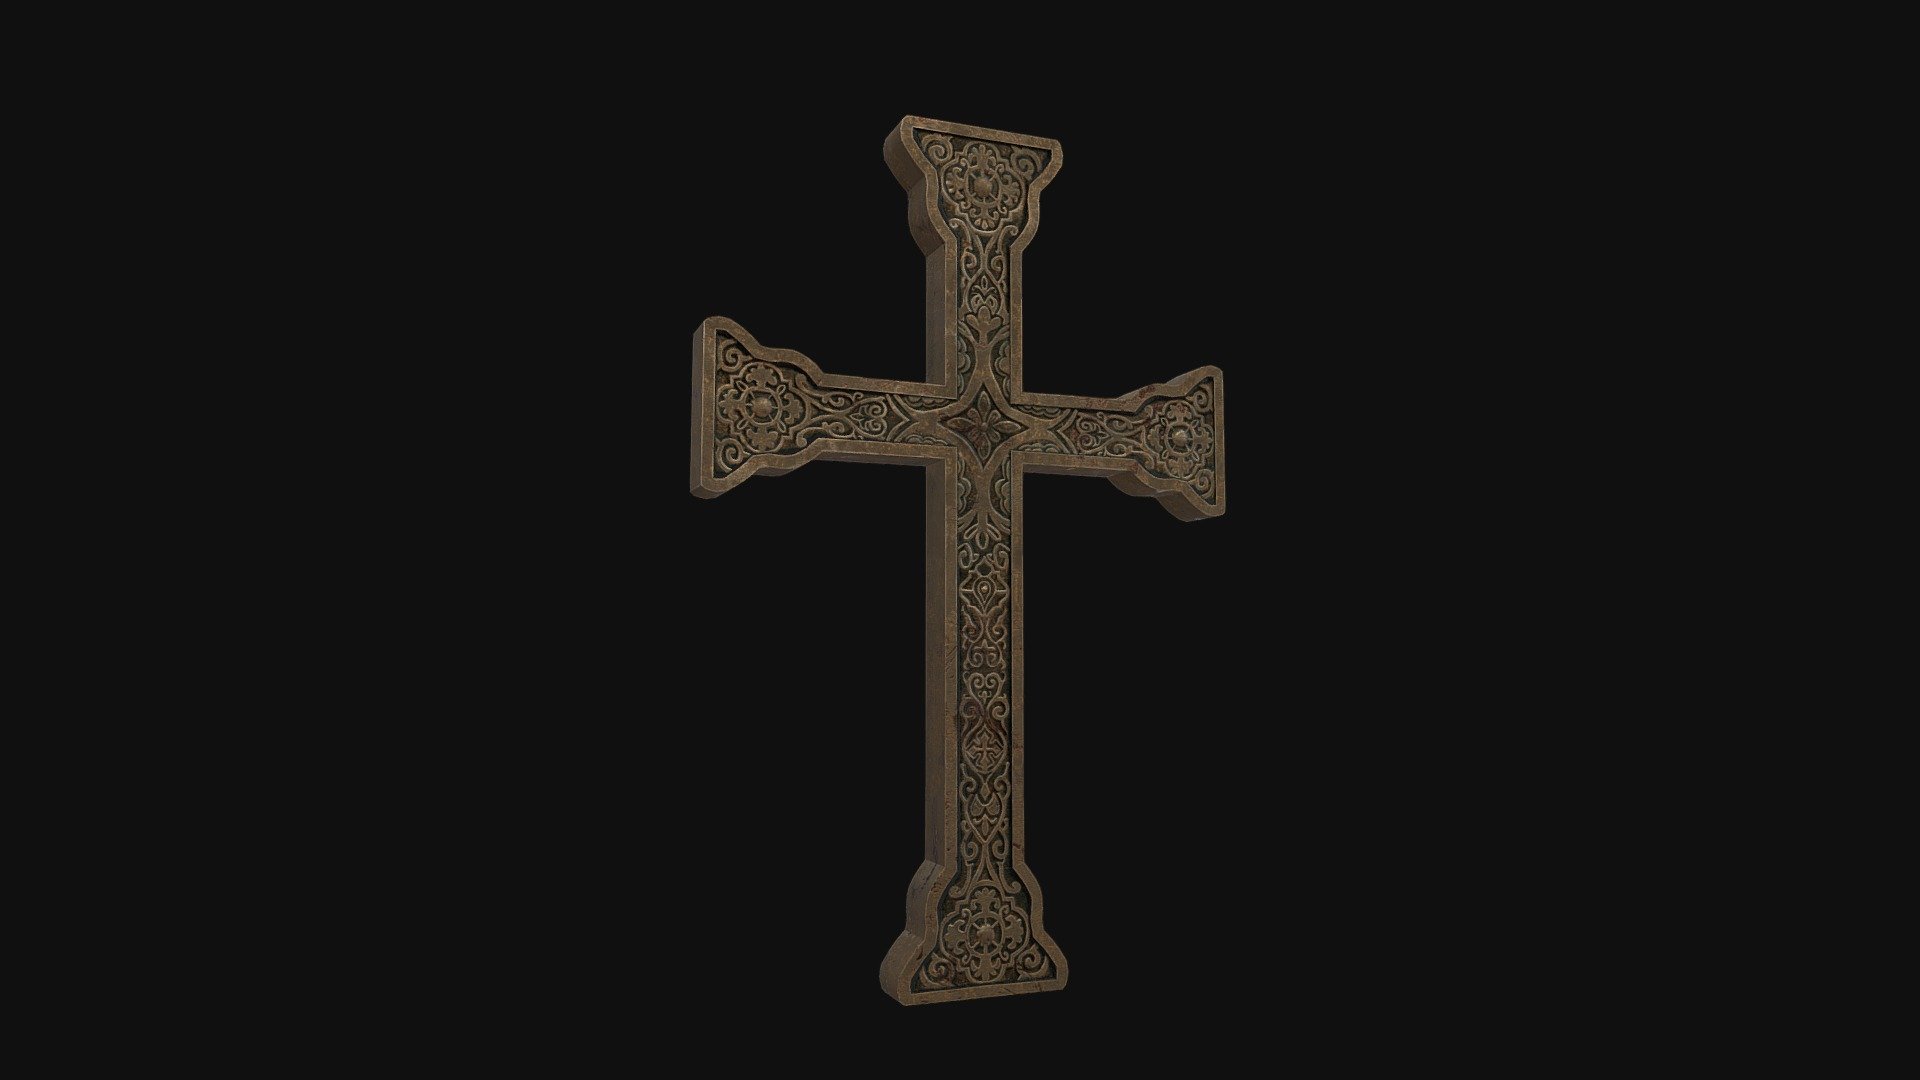 Crucifix

4096x4096 JPG texture

Textures include:

-Base Color

-Normal

-Roughness

-Metallic

-AO

I hope you like it 3d model